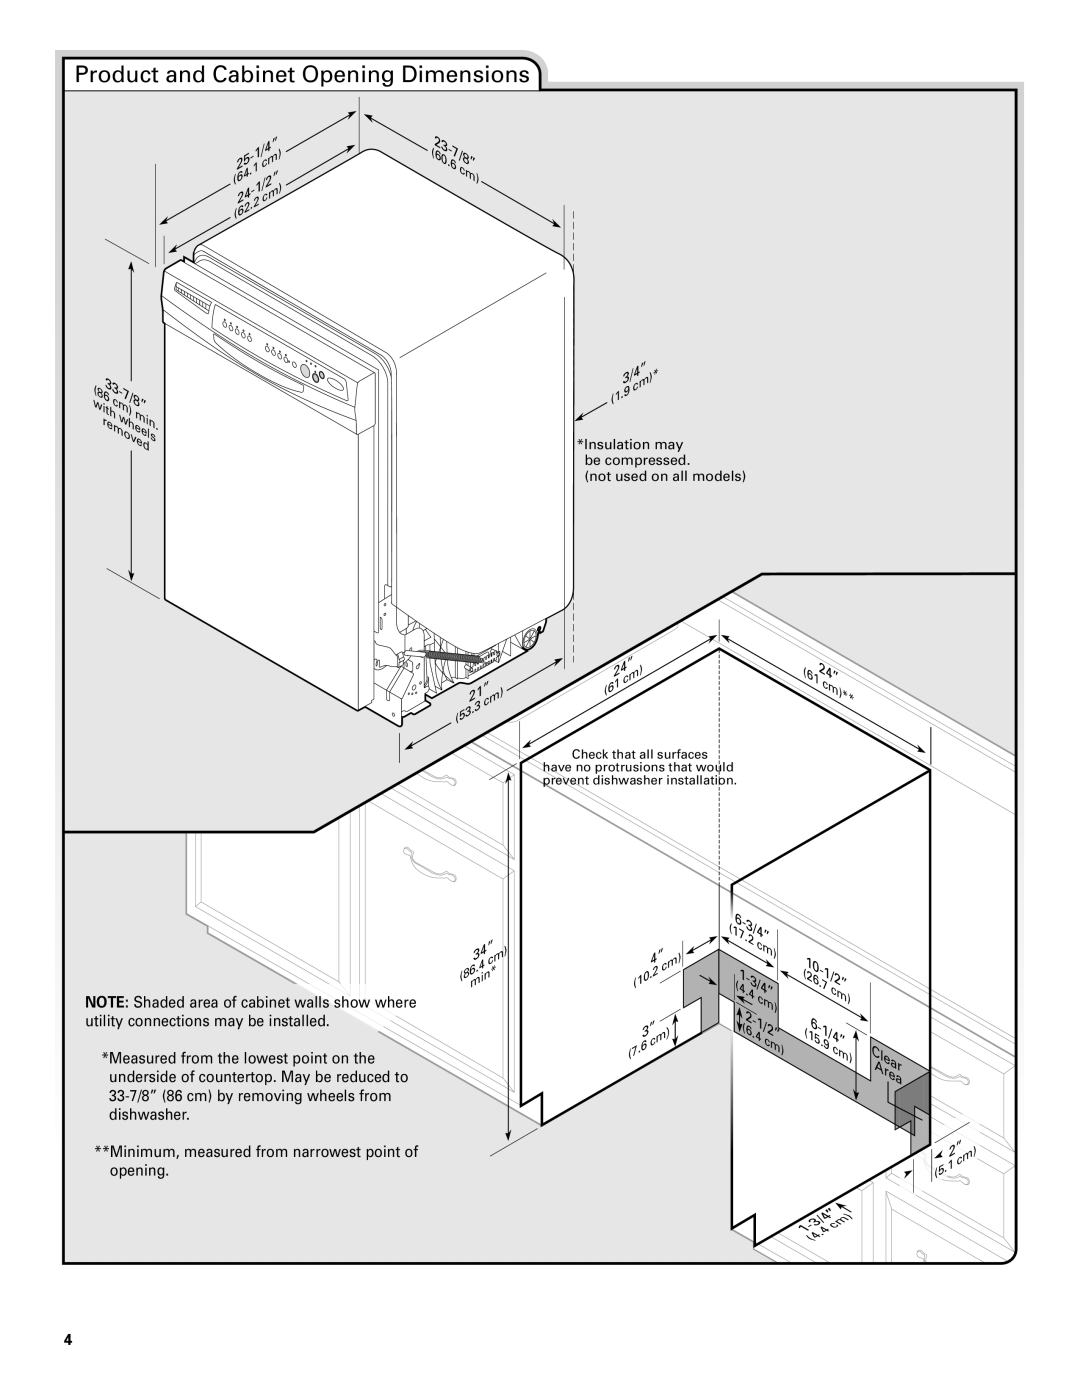 Whirlpool TUD8700SQ installation instructions Product and Cabinet Opening Dimensions, 7/8”, 43/4” 